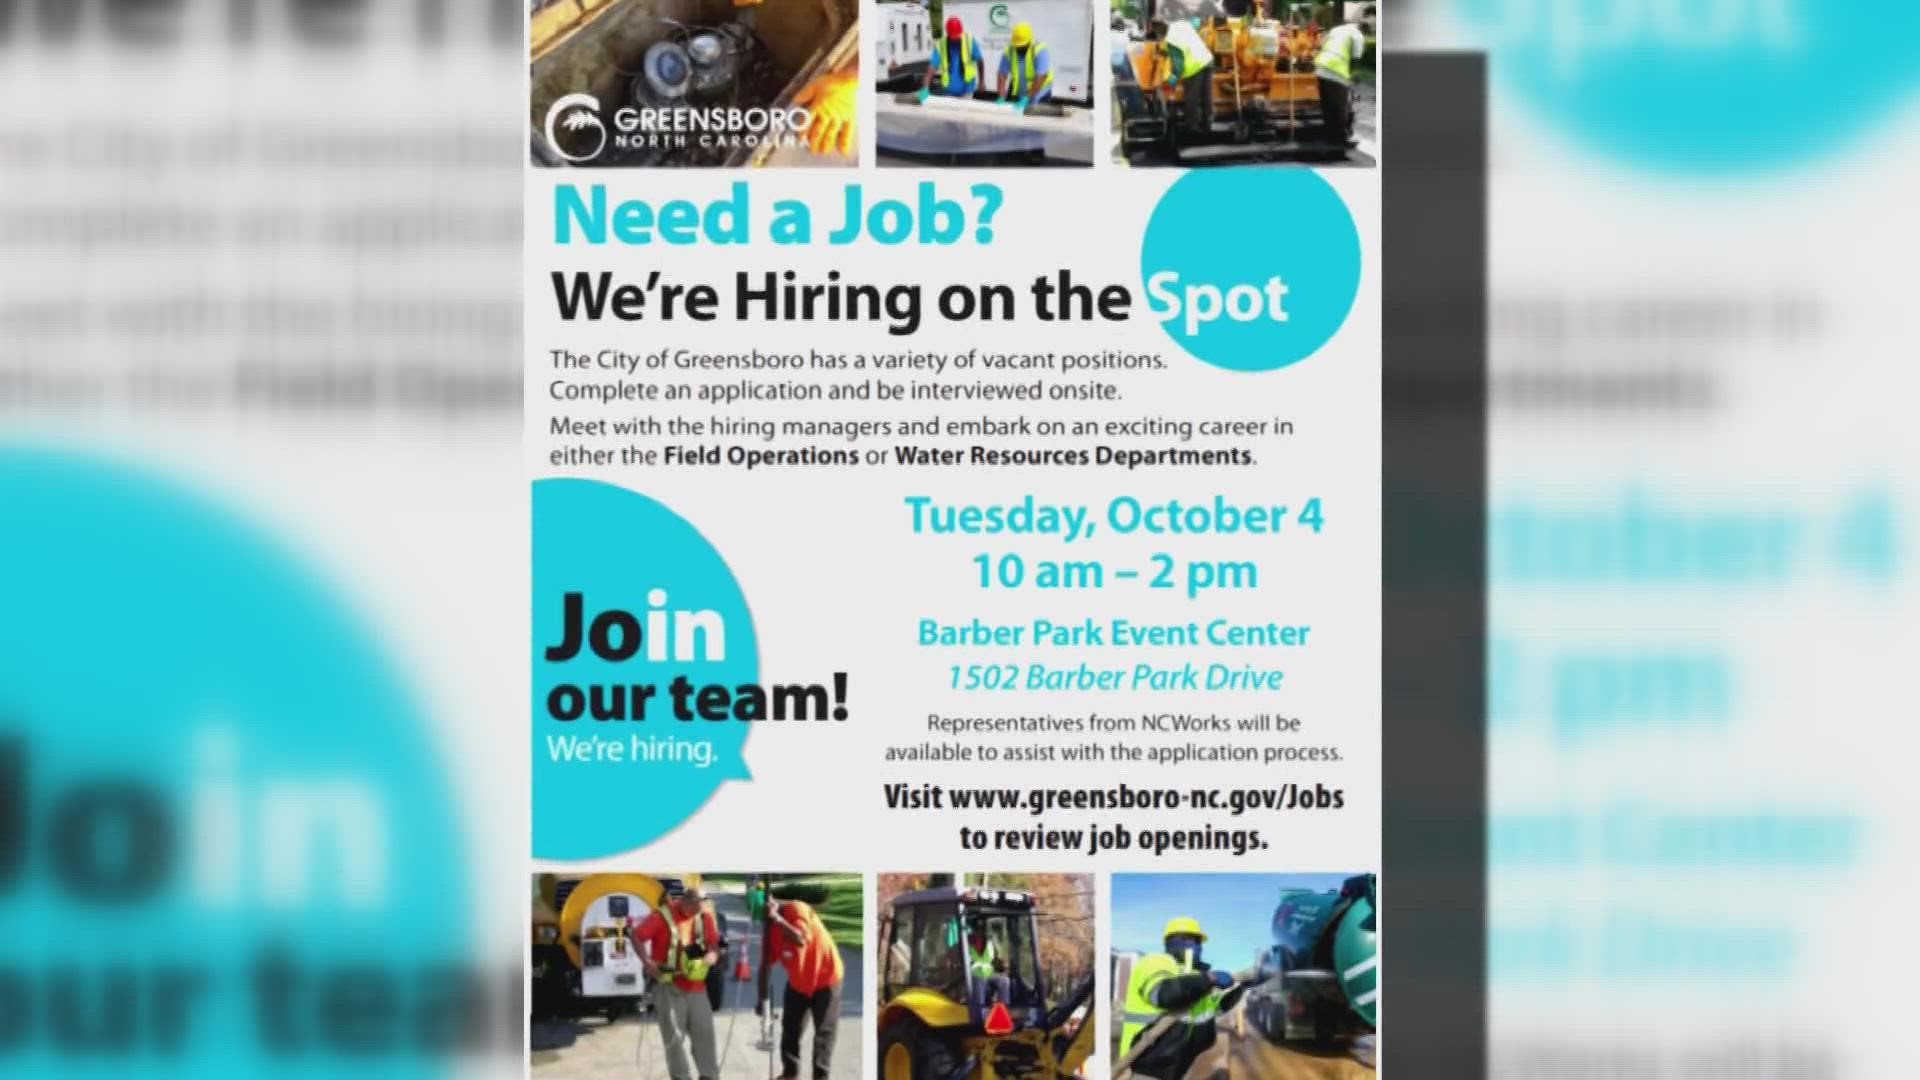 The city is hiring on the spot to fill more than 100 positions in water resources and field operations.